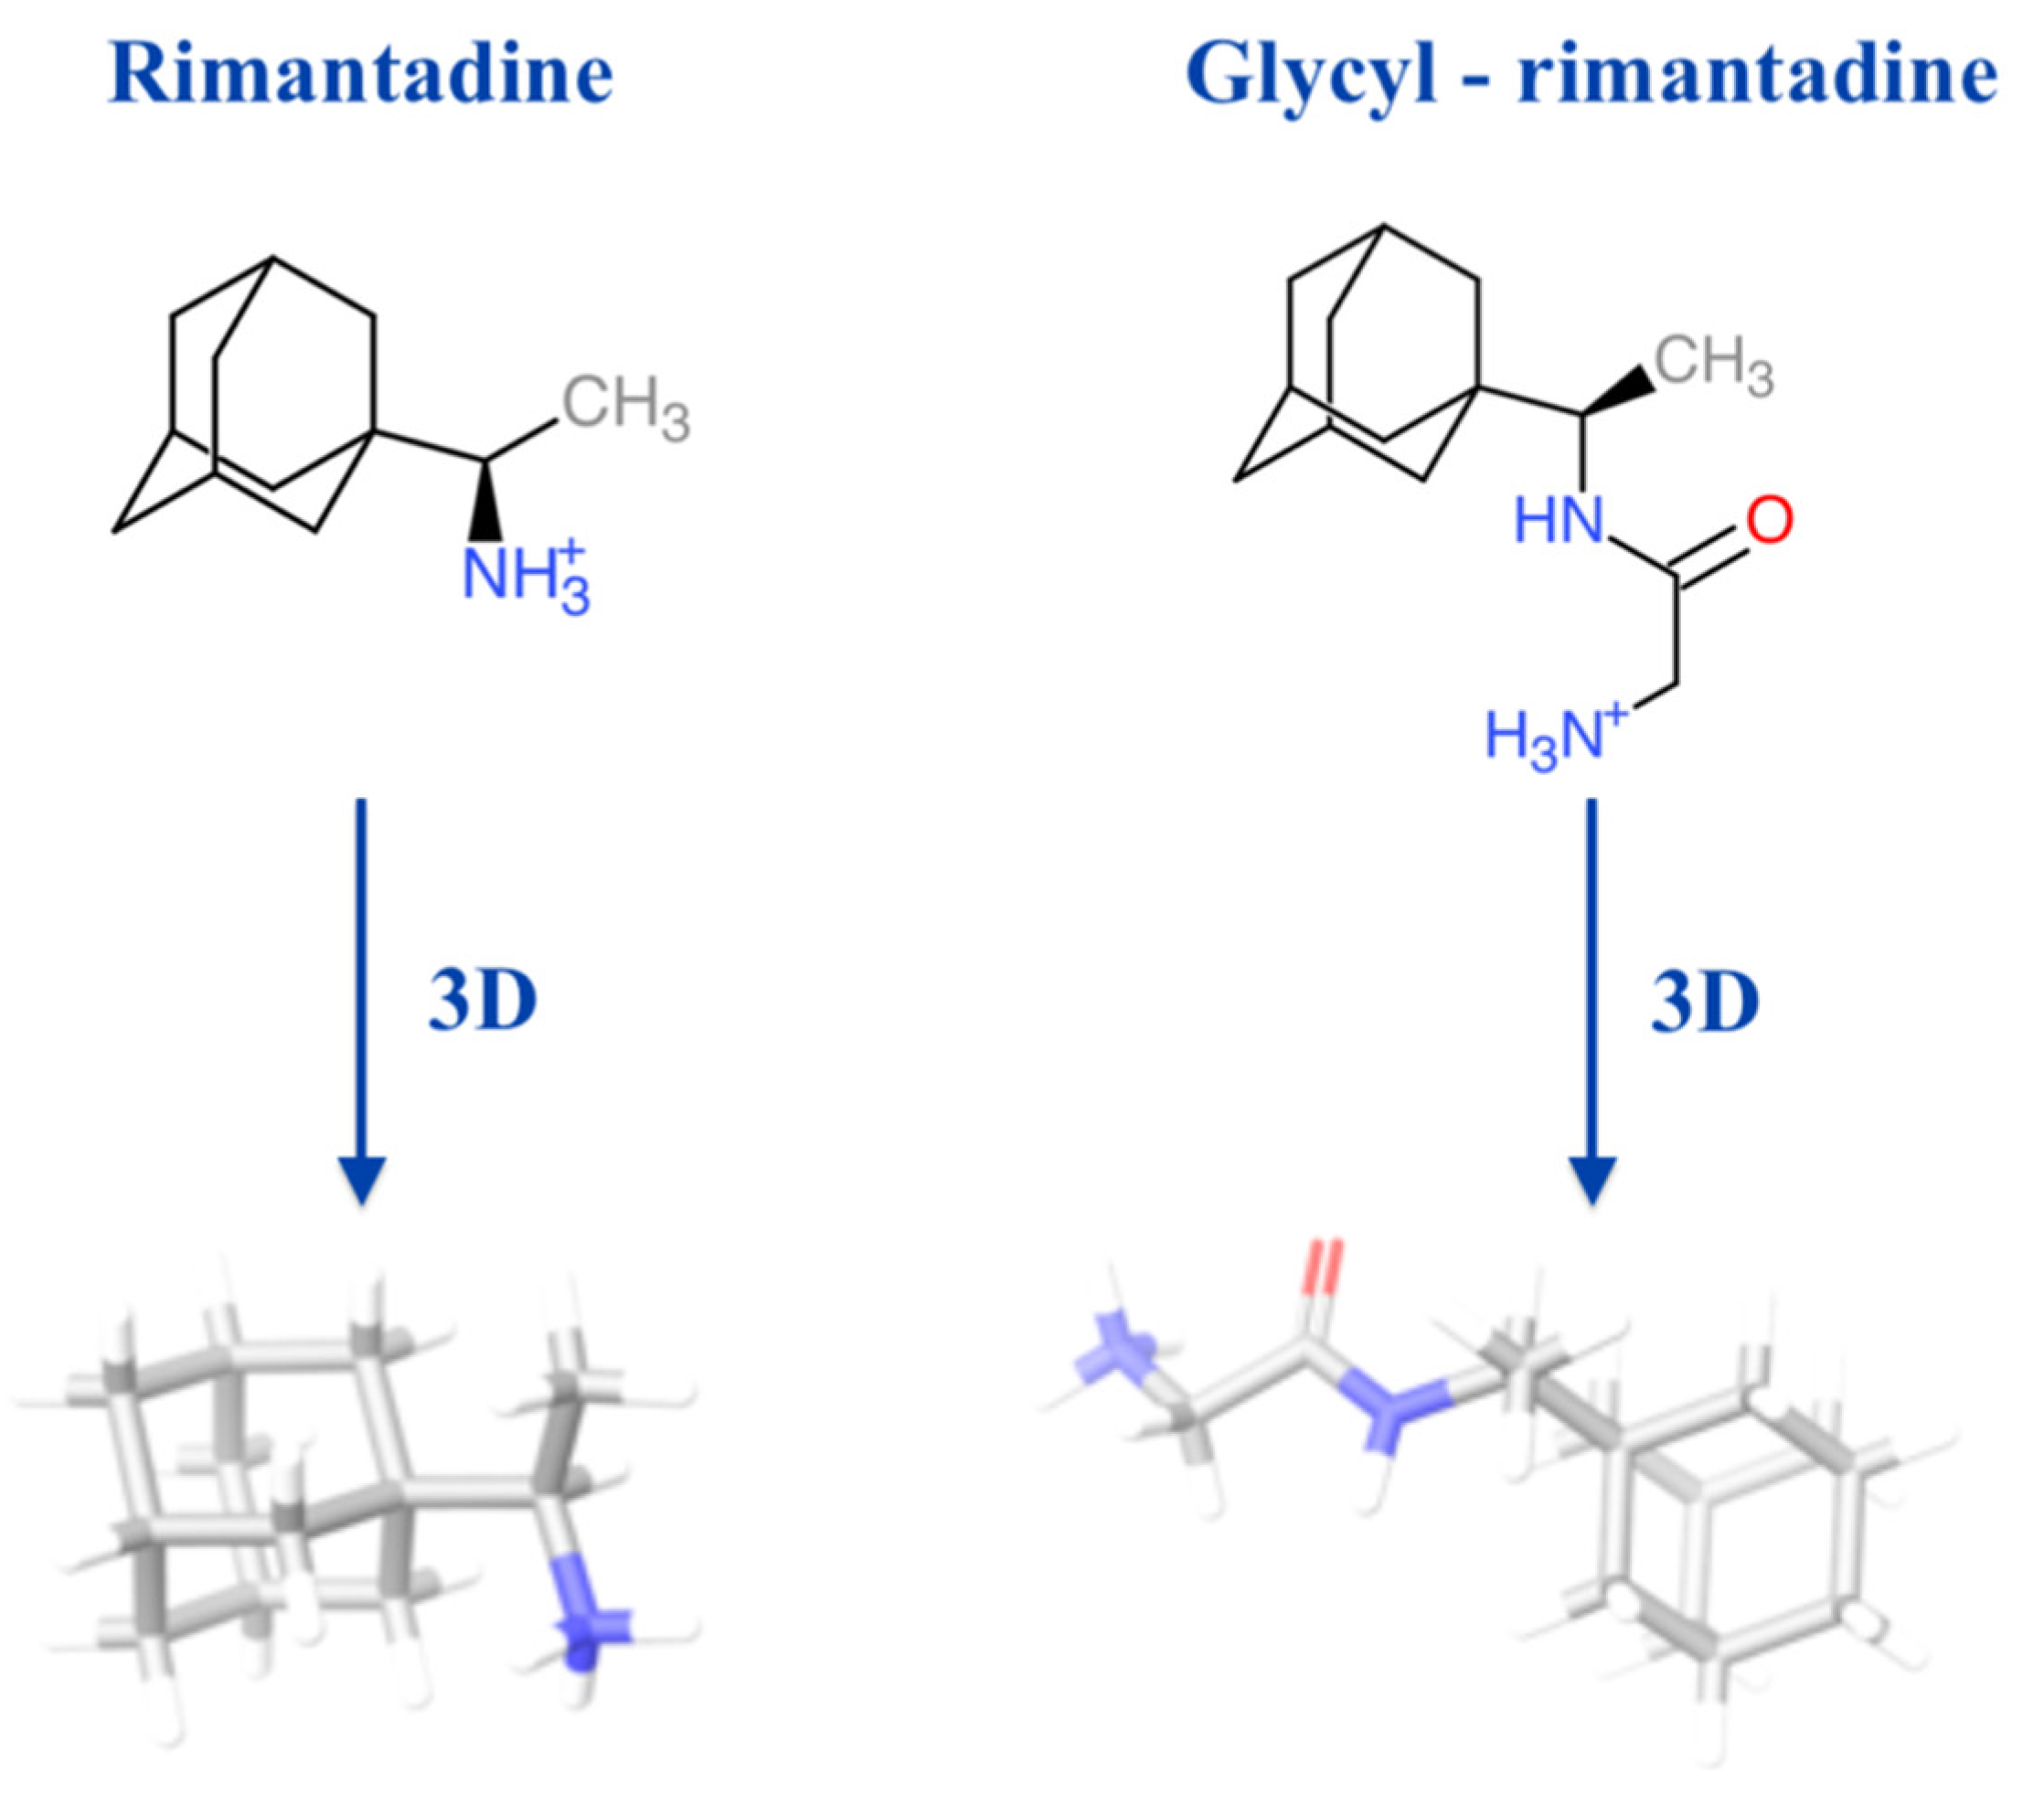 Contour plot showing the interaction of zanamivir and rimantadine